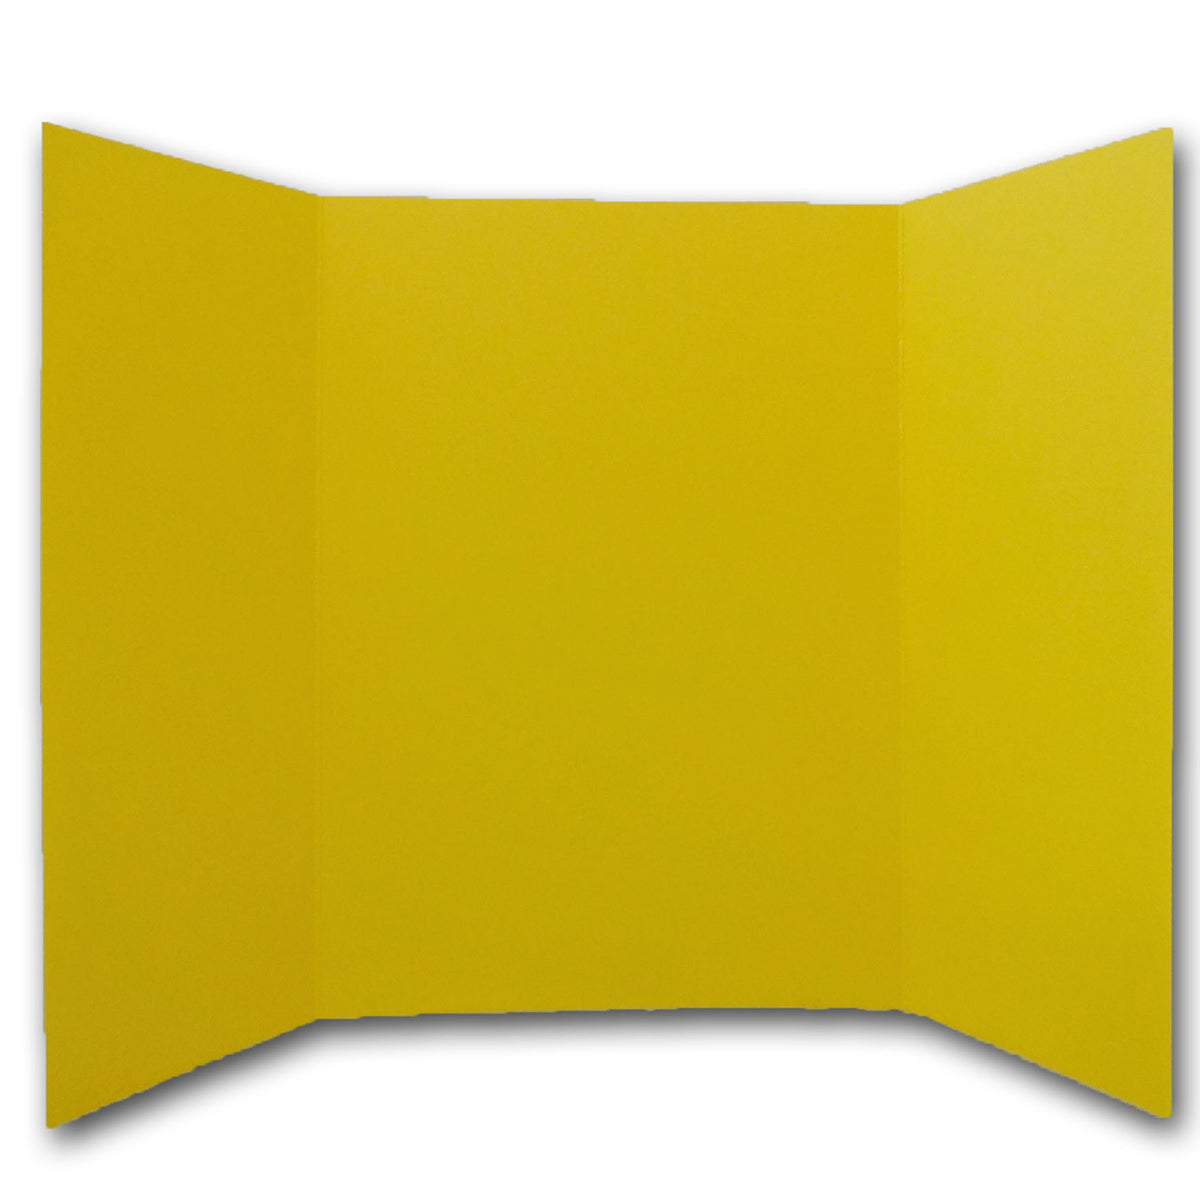 Yellow 5x7 Gate Fold Discount Card Stock for DIY Invitations